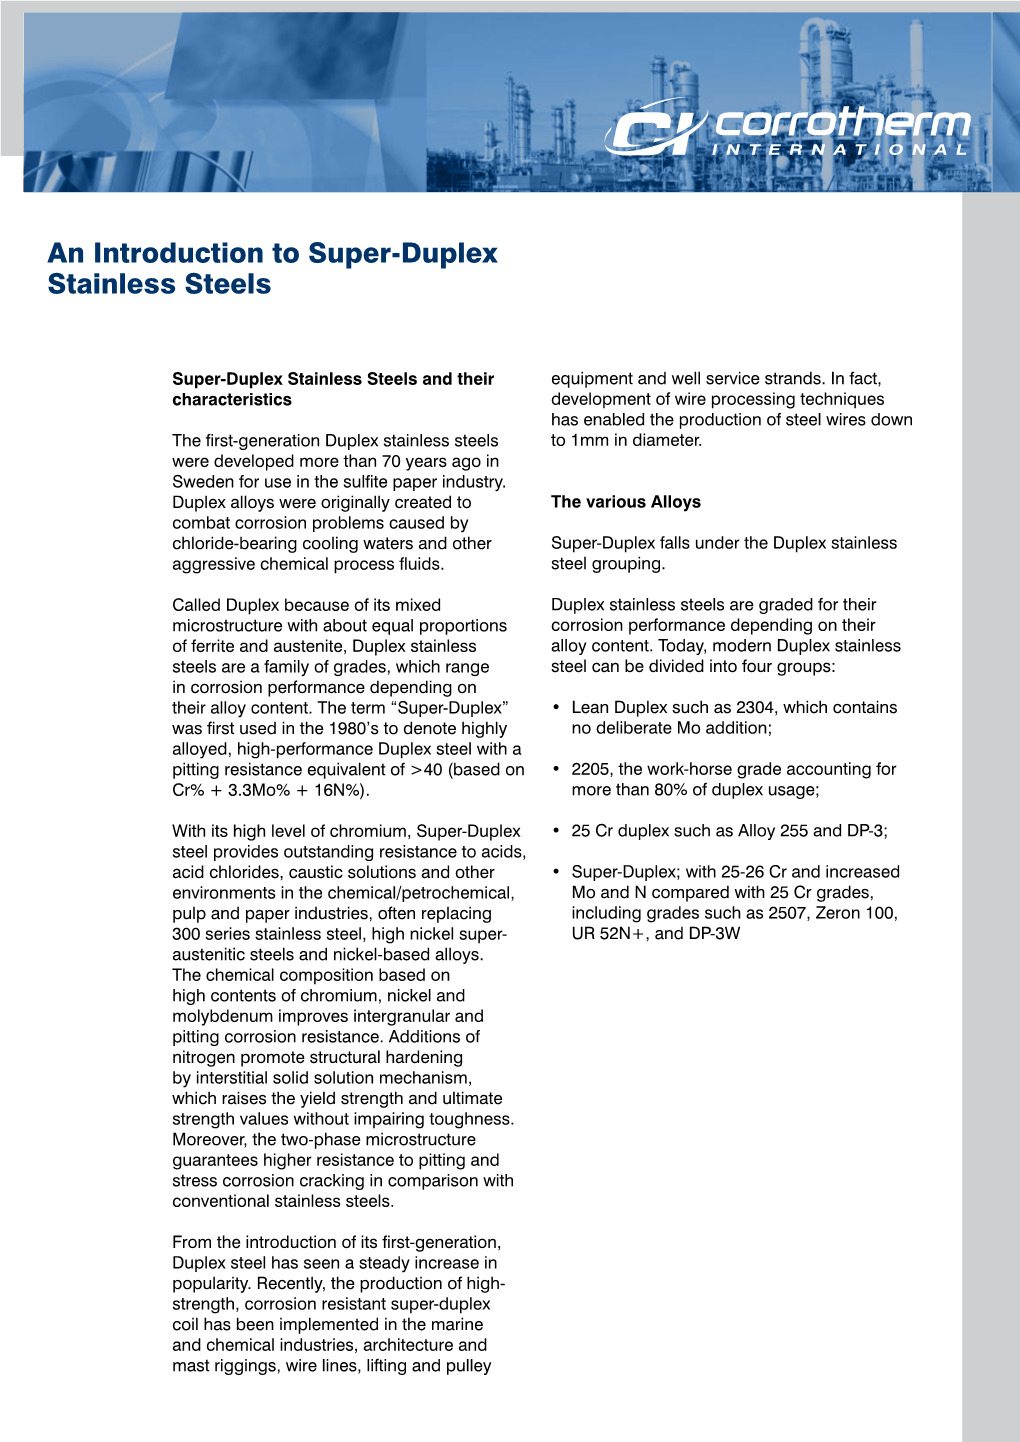 An Introduction to Super-Duplex Stainless Steels